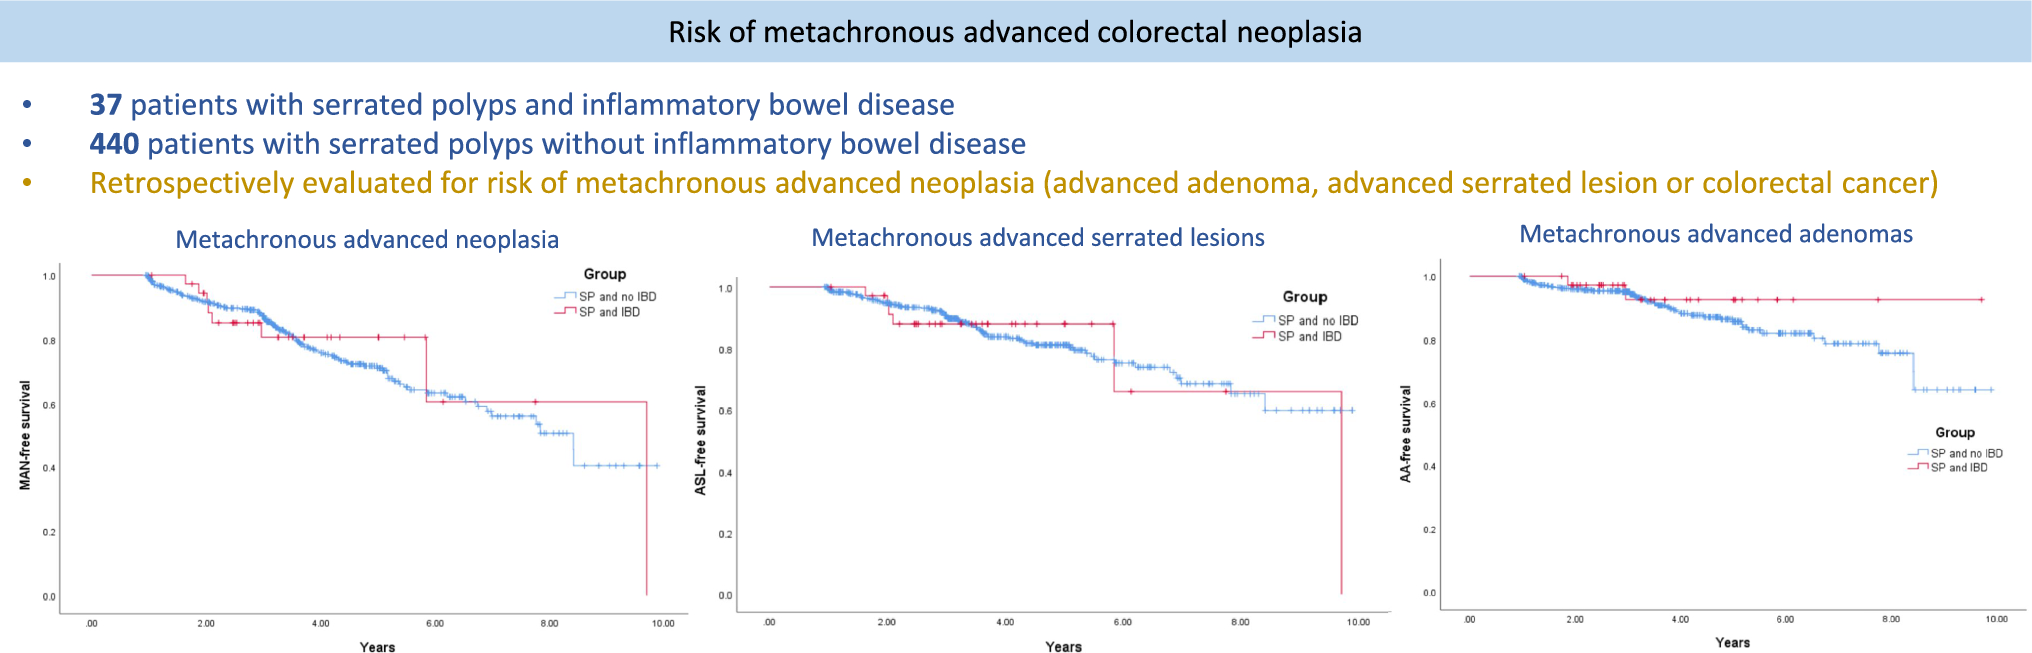 Serrated Polyps in Inflammatory Bowel Disease Indicate a Similar Risk of Metachronous Colorectal Neoplasia as in the General Population